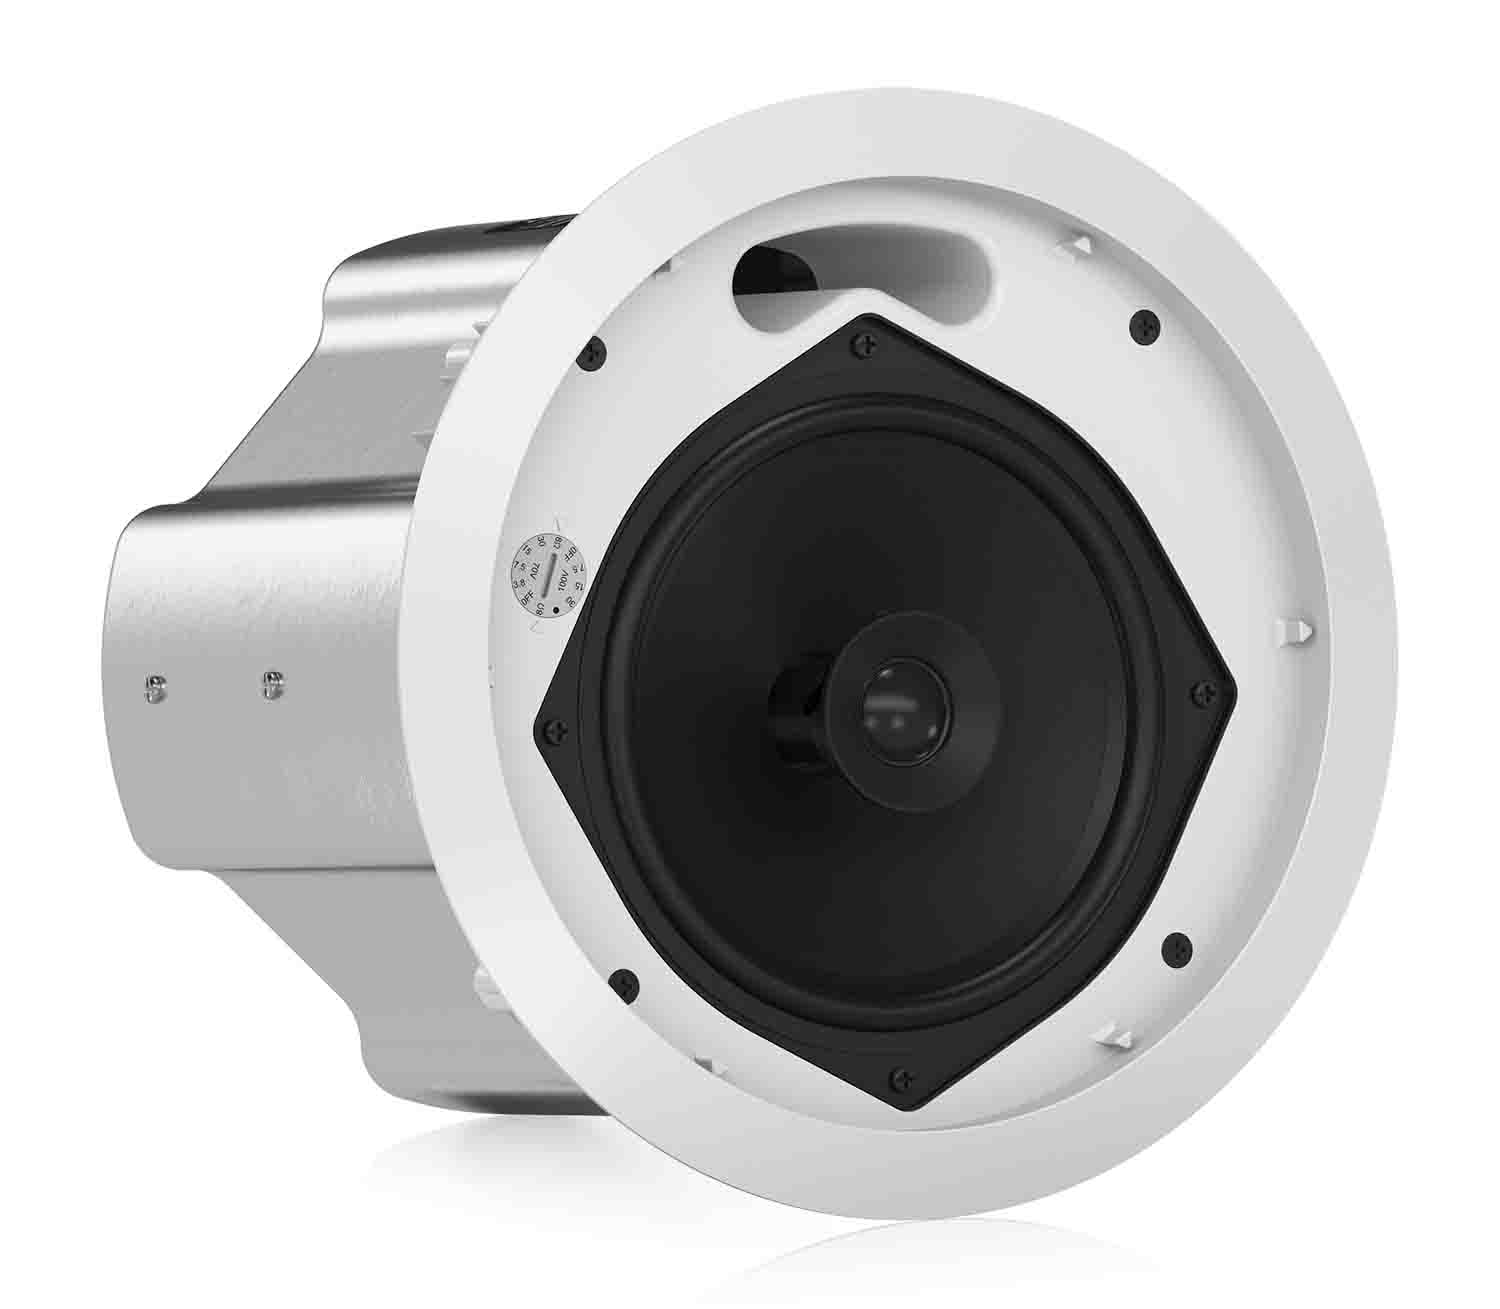 Tannoy CVS 601, 6.5-Inch Coaxial In-Ceiling Loudspeaker for Installation Applications - Hollywood DJ